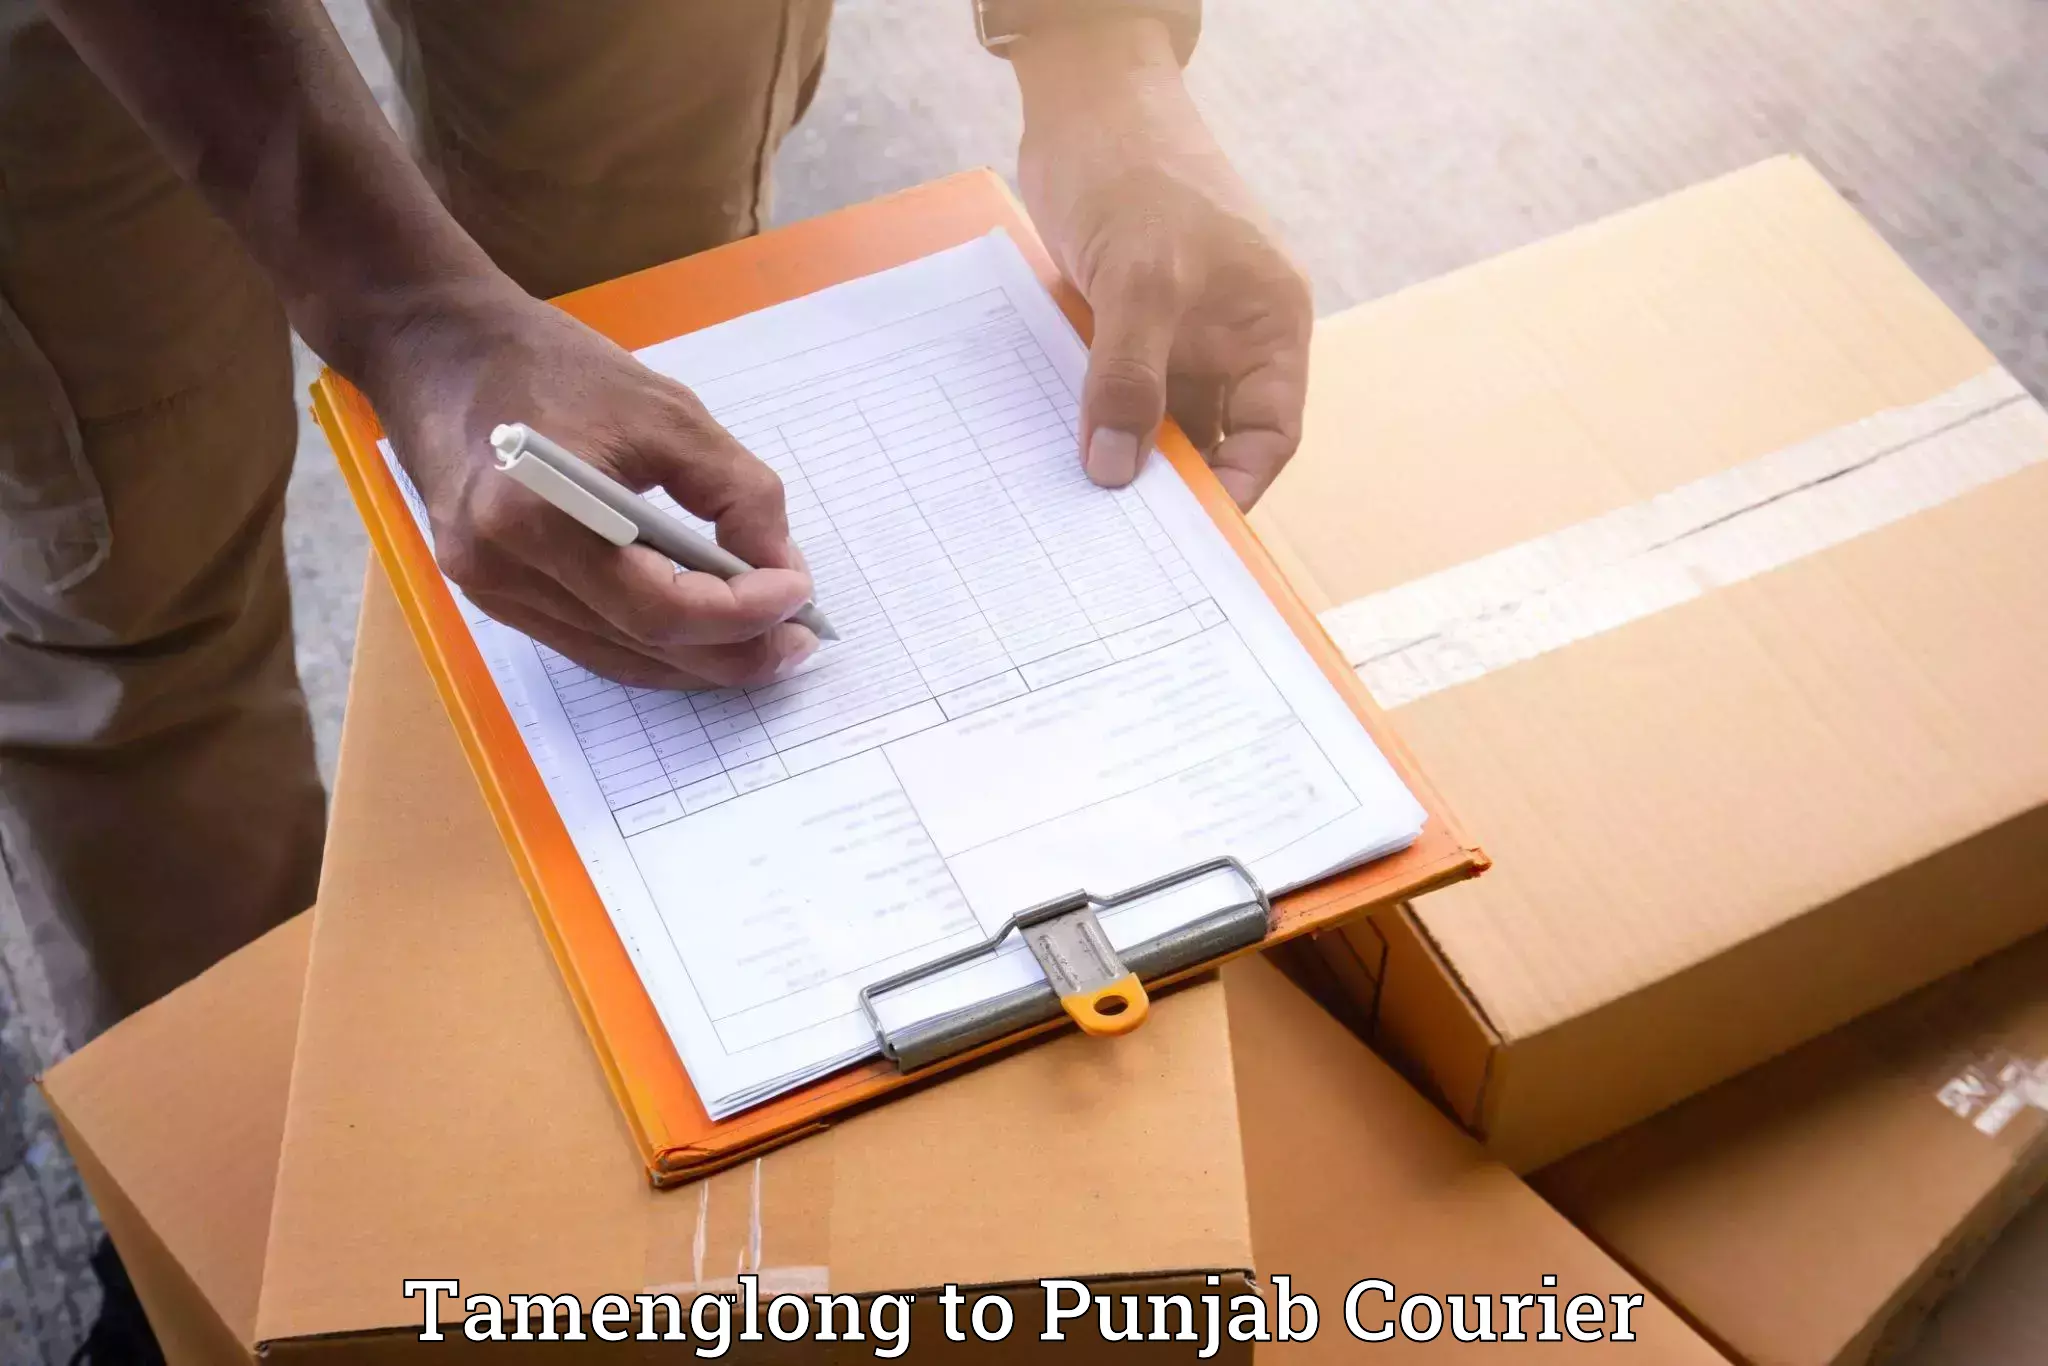 Moving and storage services Tamenglong to Punjab